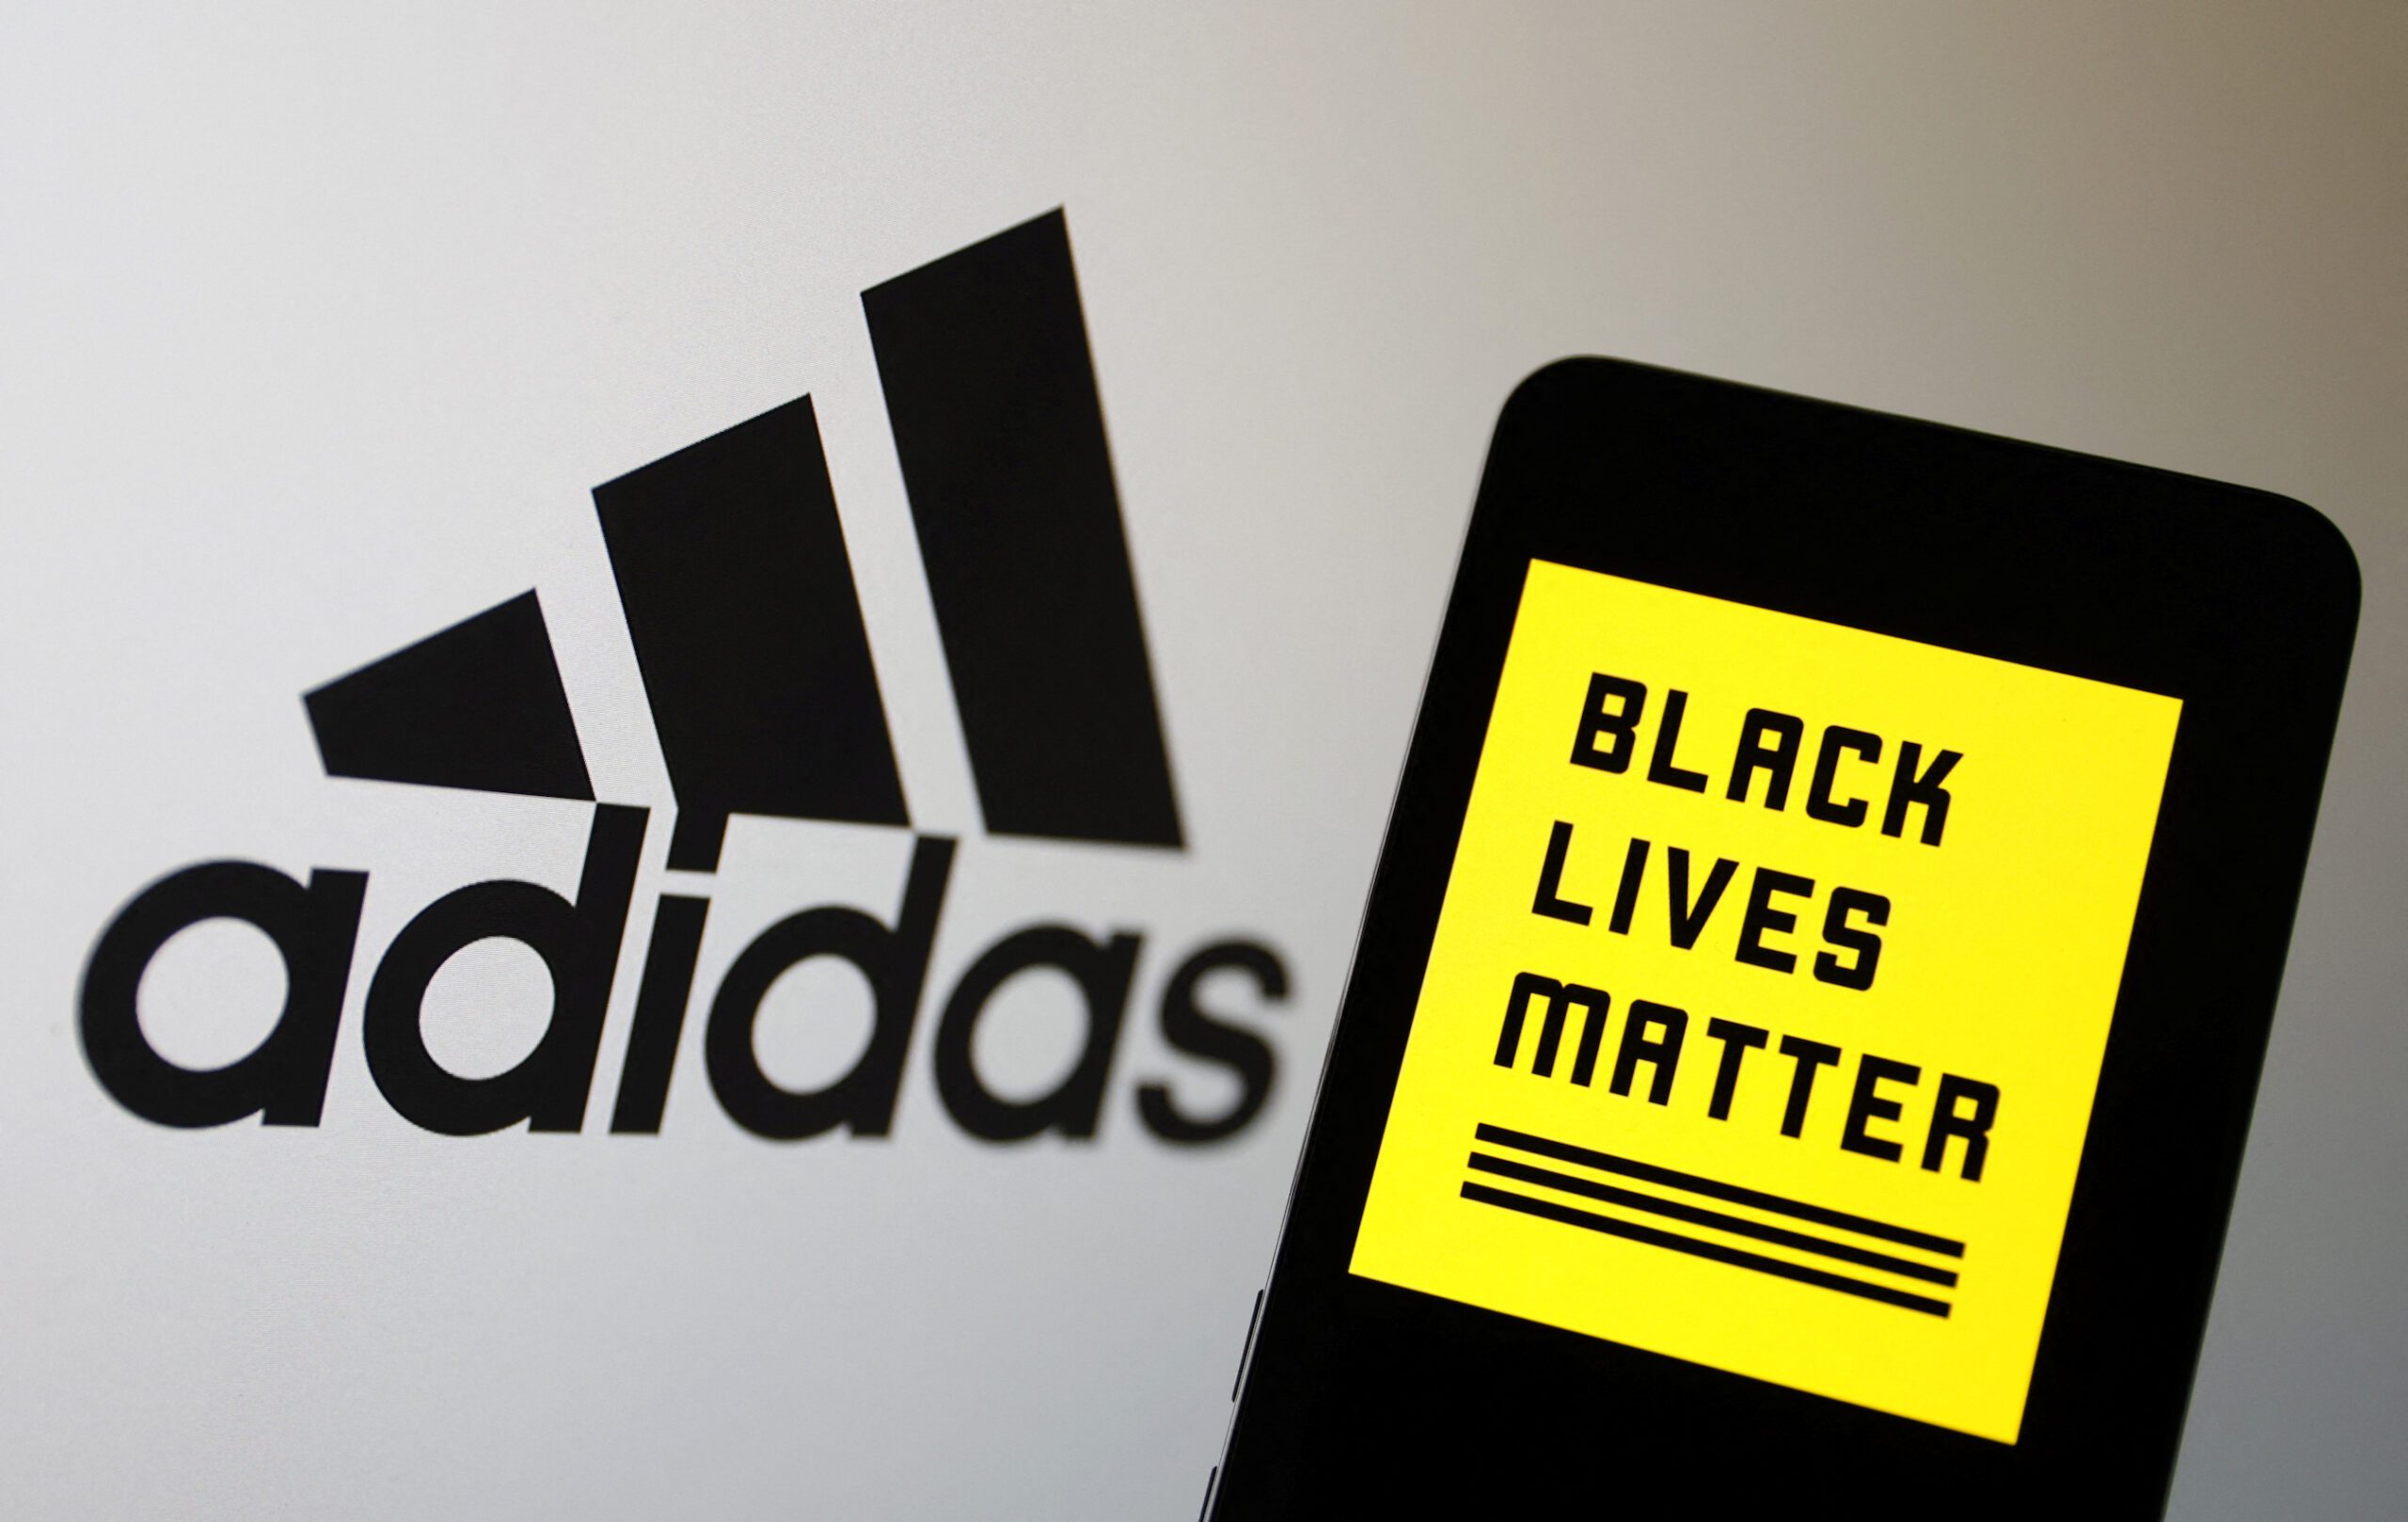 Adidas retracts opposition to Black Lives Matter three-stripe design